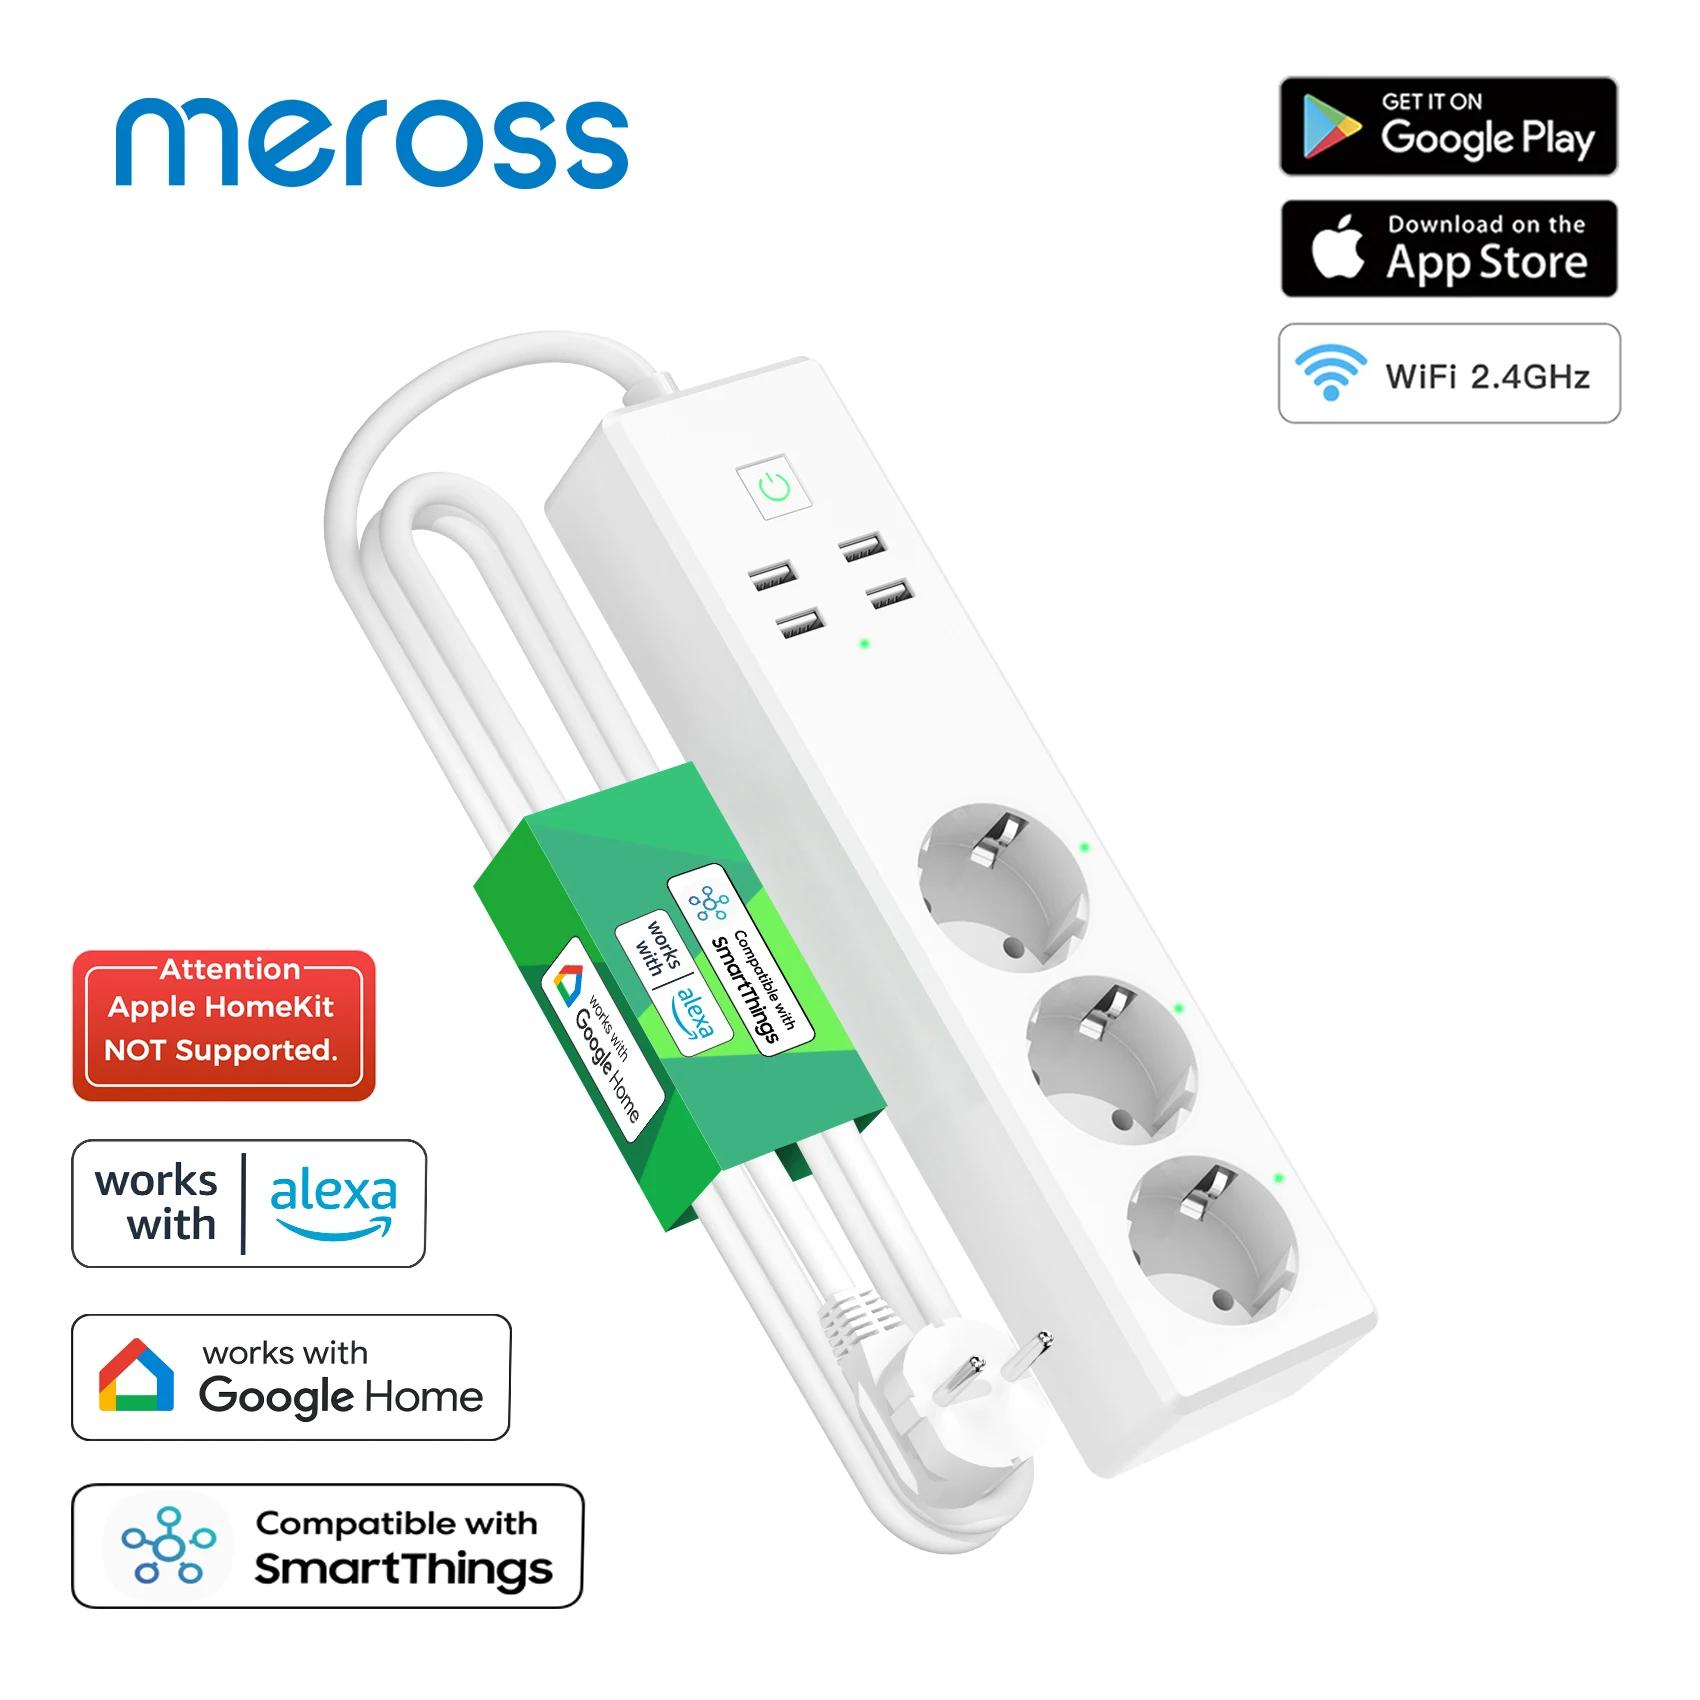 https://ae01.alicdn.com/kf/S106e6aa2e3f942a28cec5744c7886e37L/Meross-Smart-Power-Strip-WiFi-Surge-Protector-EU-Outlets-Extension-with-USB-Ports-Support-SmartThings-Alexa.jpg